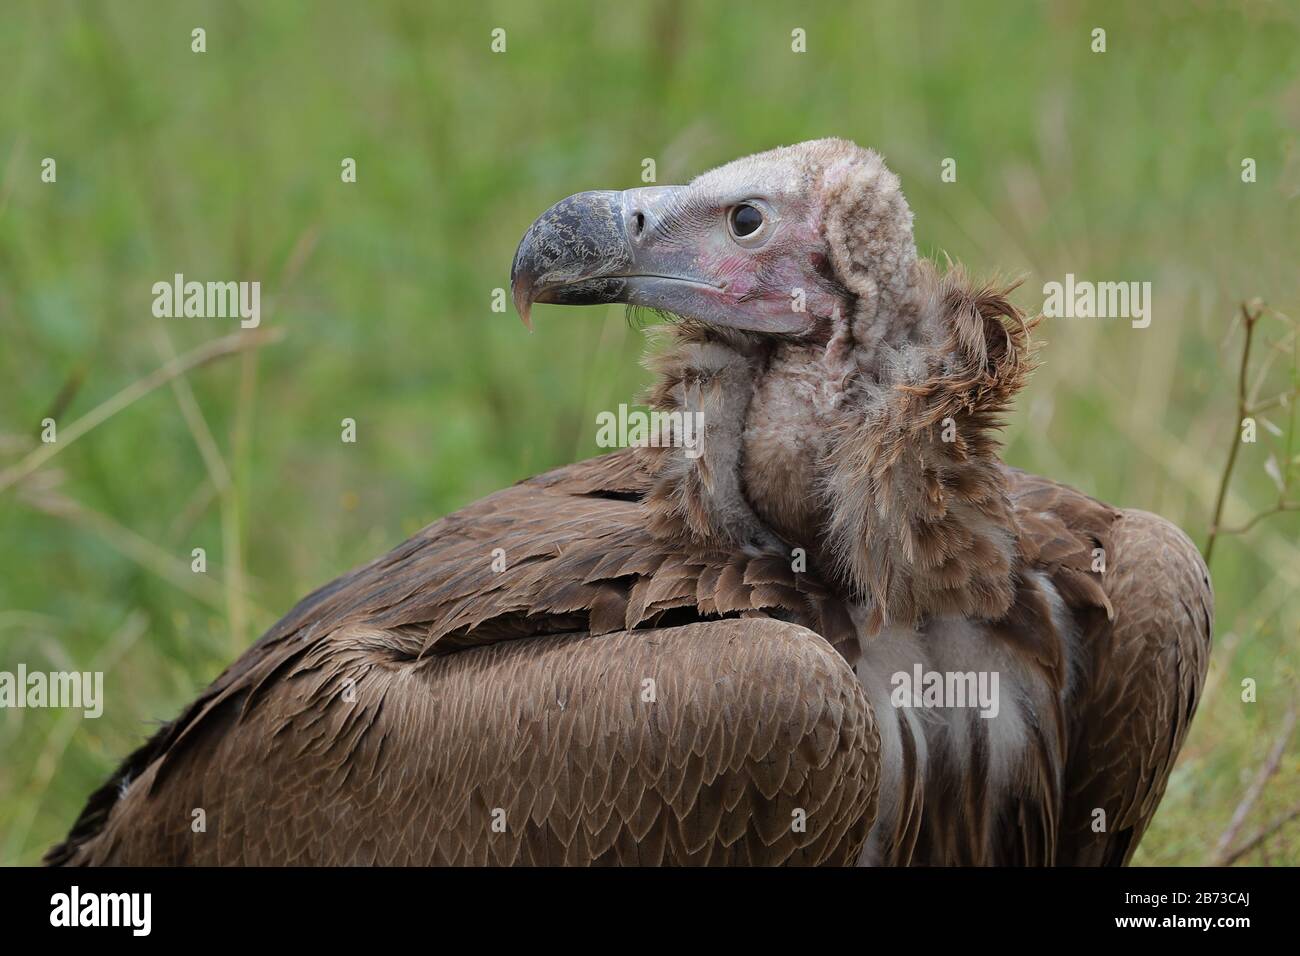 The lappet-faced vulture or Nubian vulture is an Old World vulture ...